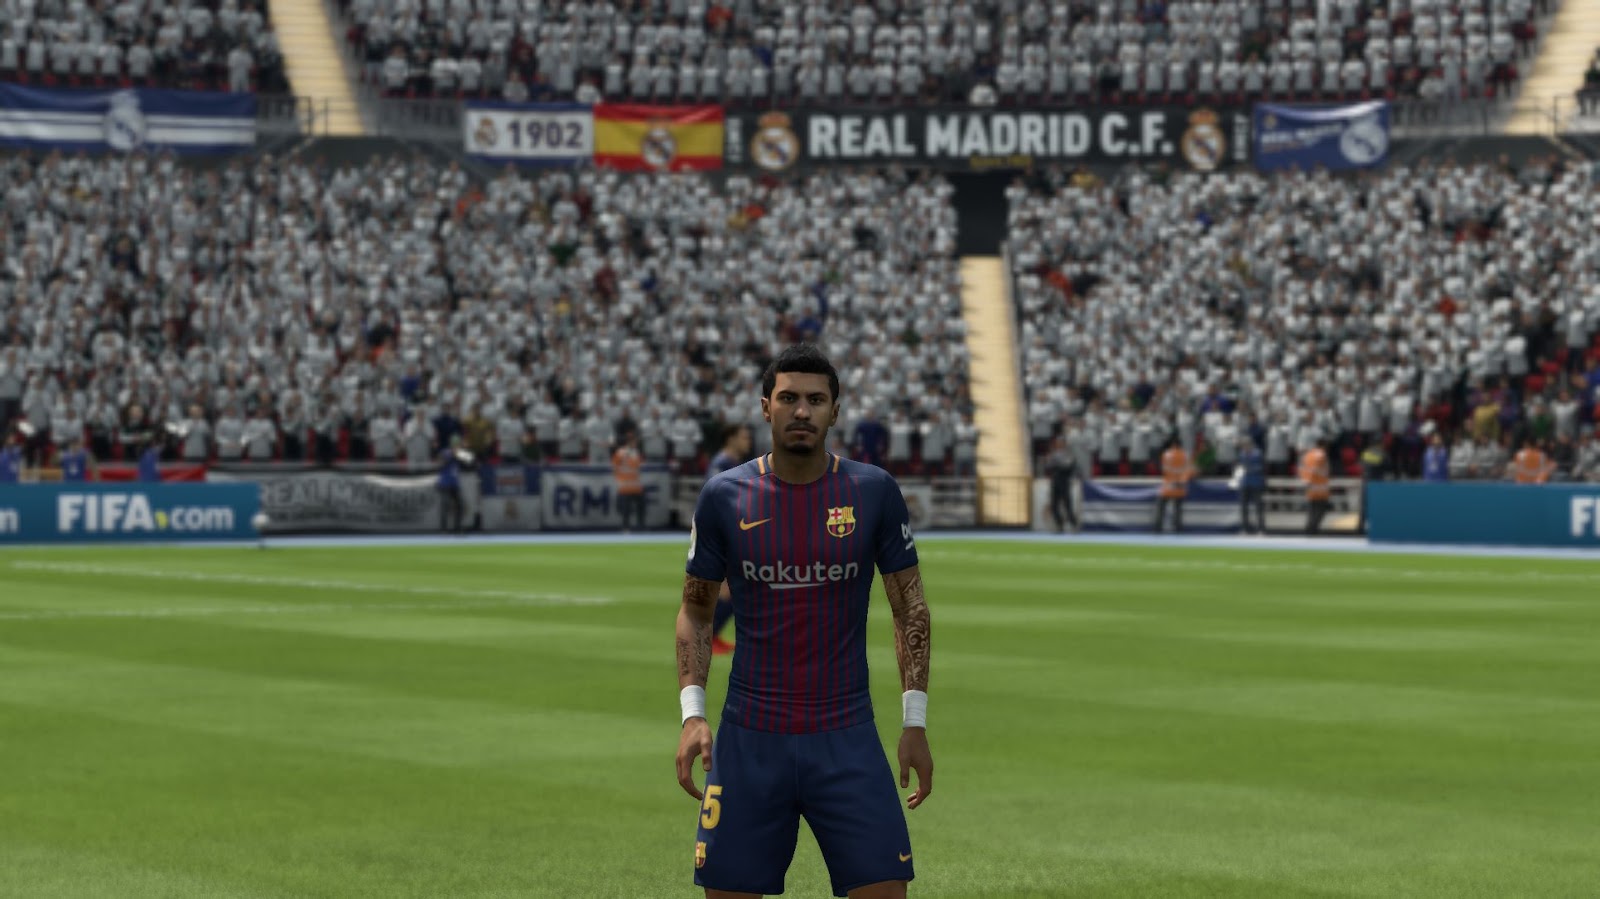 Fifa classic patch. ФИФА 18 патч 2023. PLAYSTATION 4 игра ФИФА Манагер. FIFA 18 PC. Sam megapatch 2013 Final Version download.